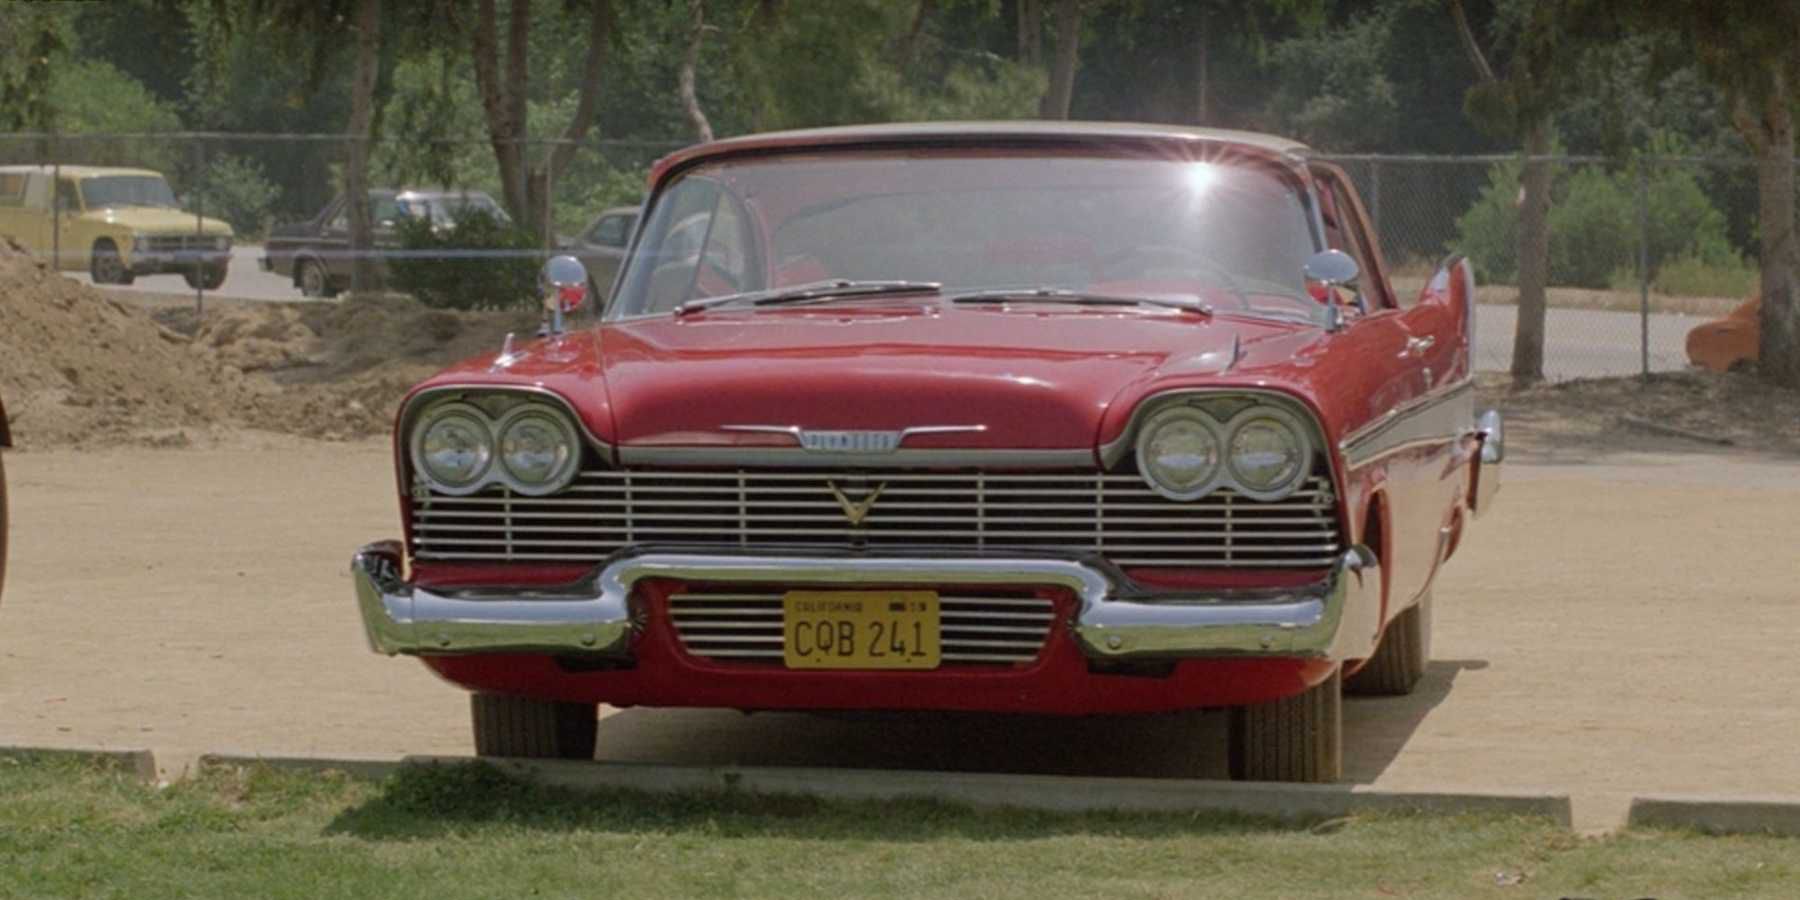 The evil 1958 Plymouth Fury in Christine